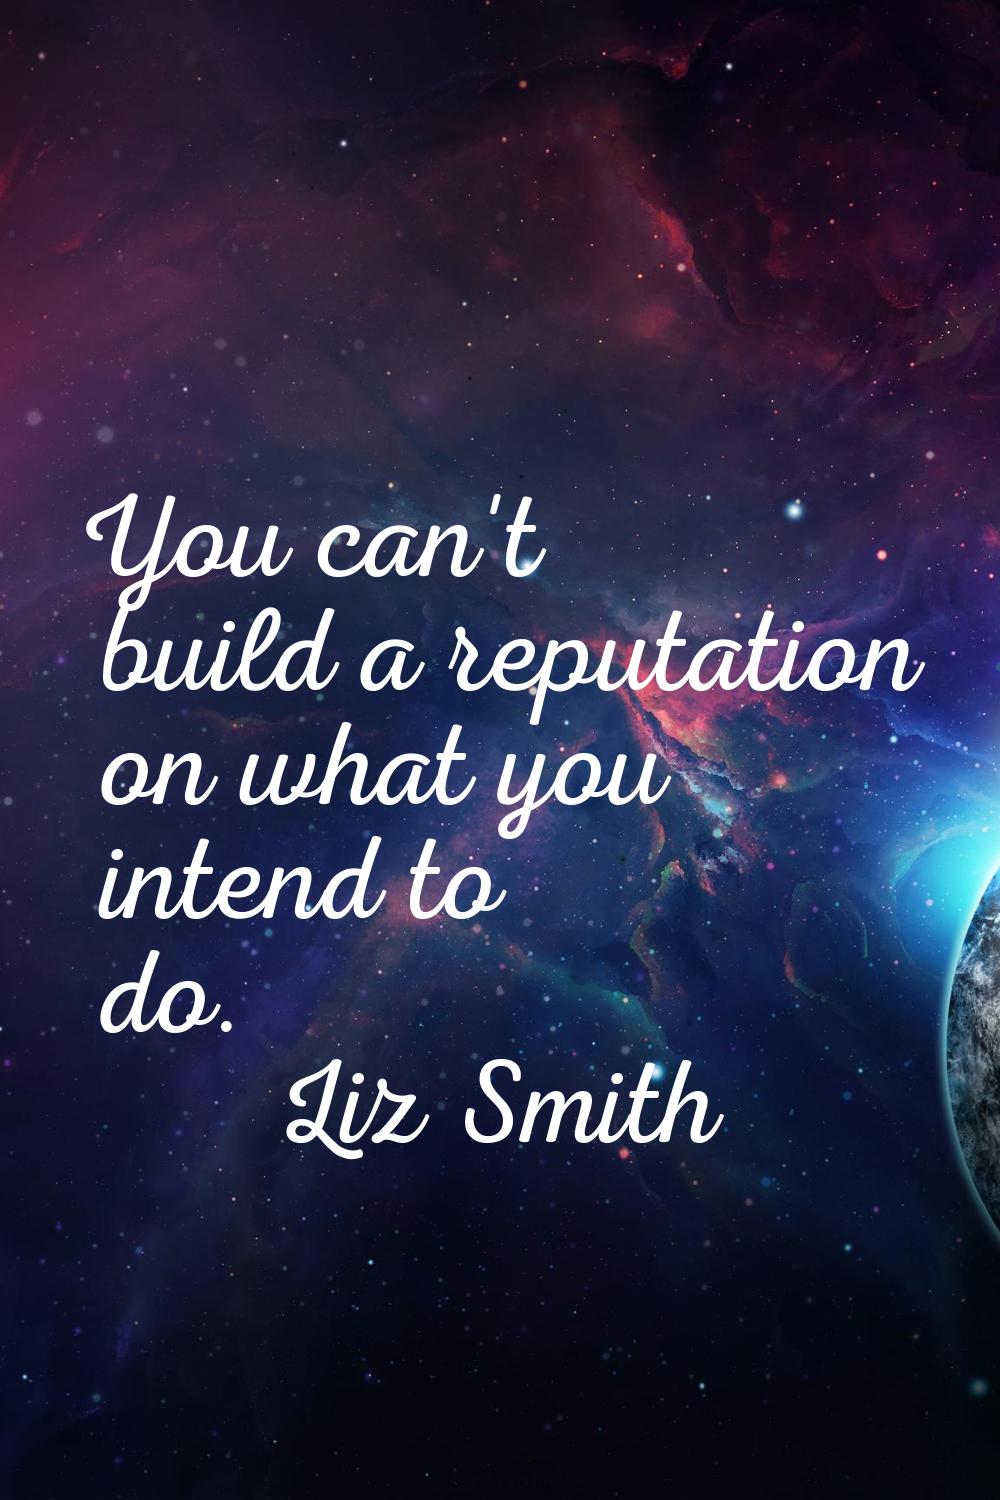 You can't build a reputation on what you intend to do.